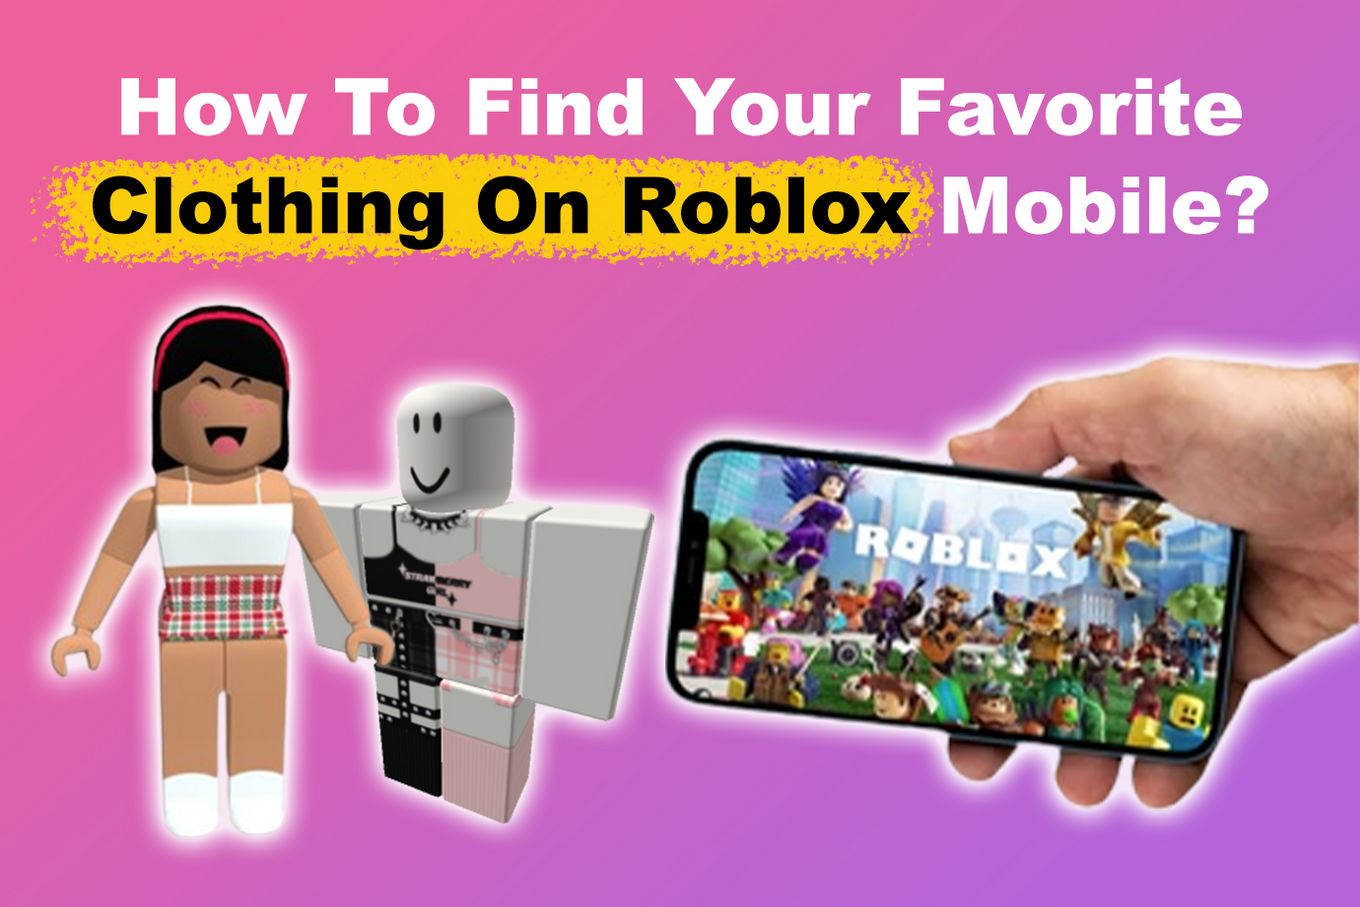 How to find your favorite clothing on Roblox Mobile